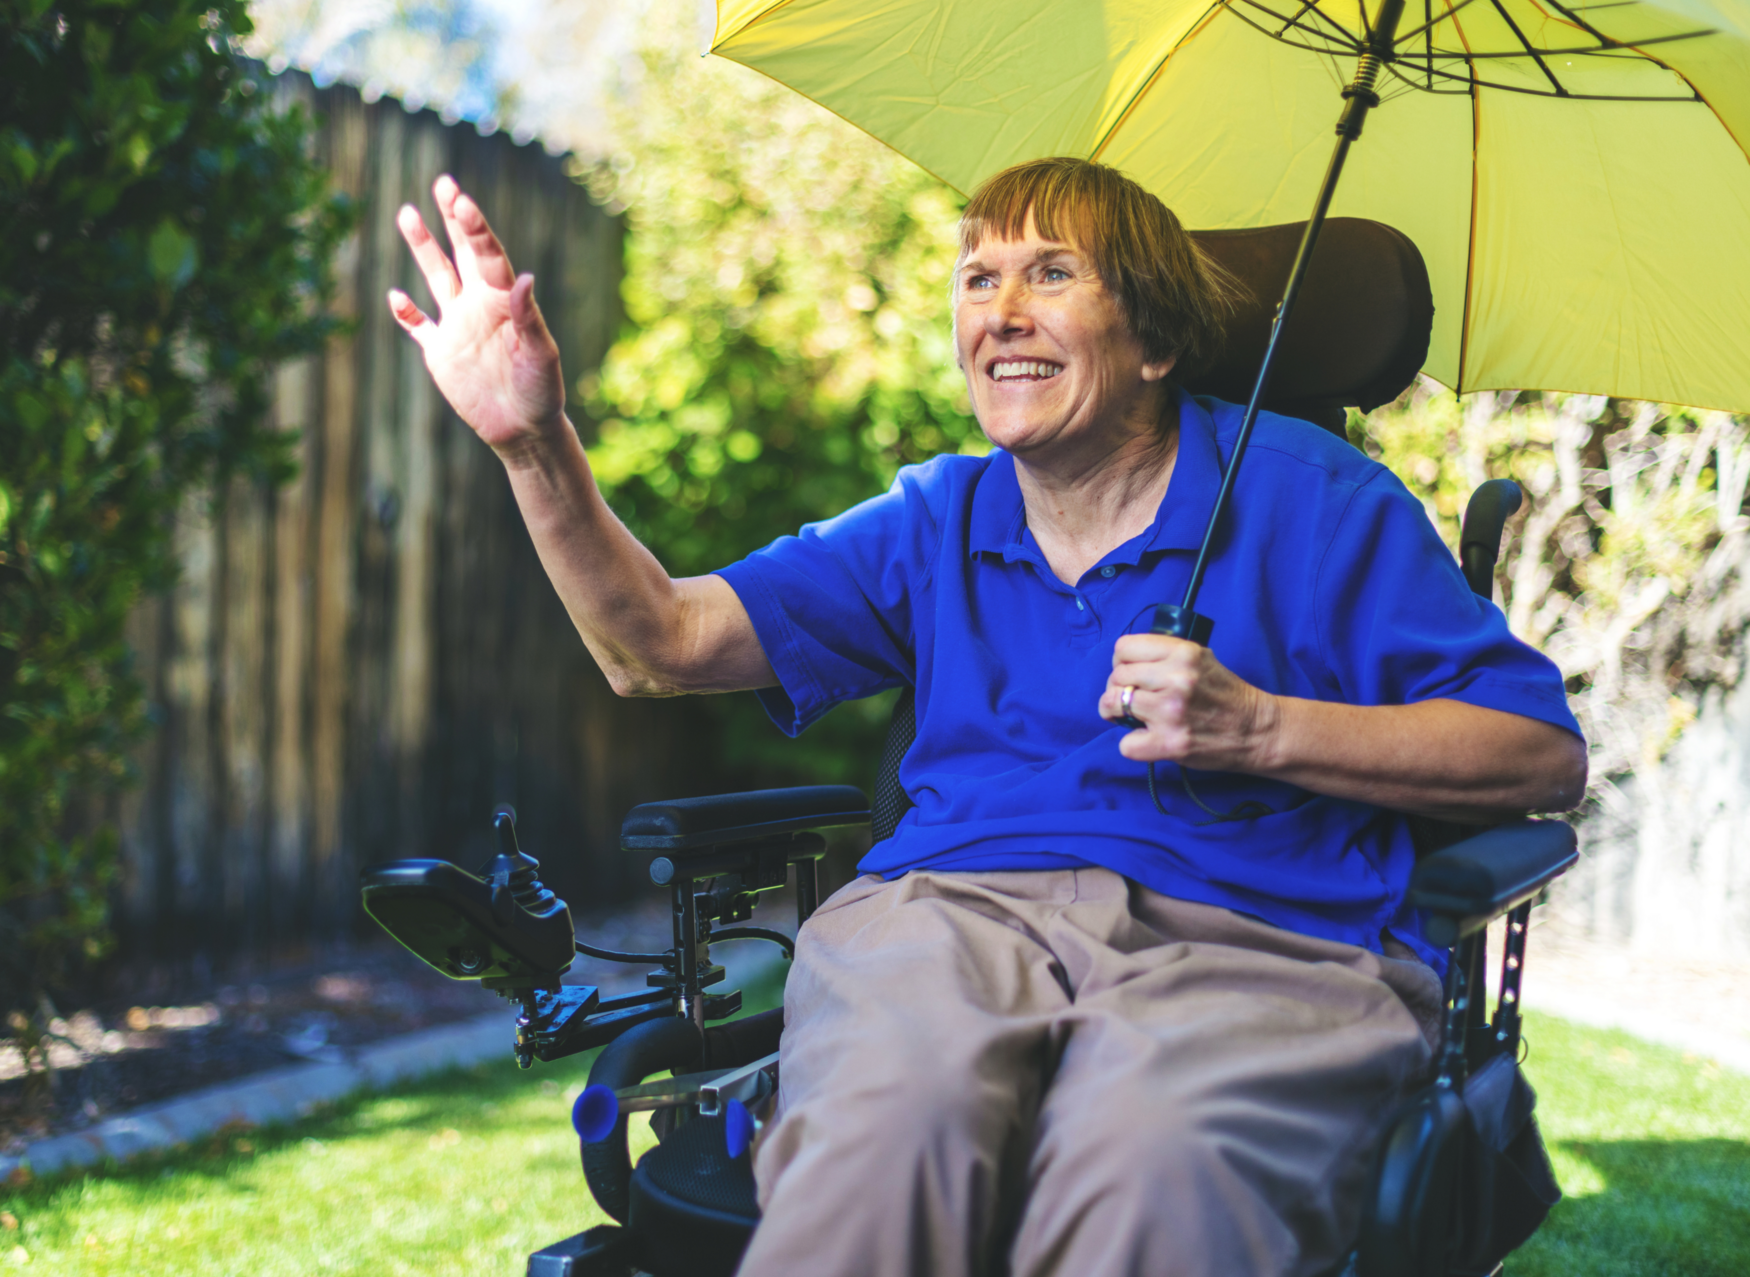 A middle-aged woman in an electric wheelchair sits outside. She is holding a yellow umbrella, smiling, and waving at someone who is not in the photo.